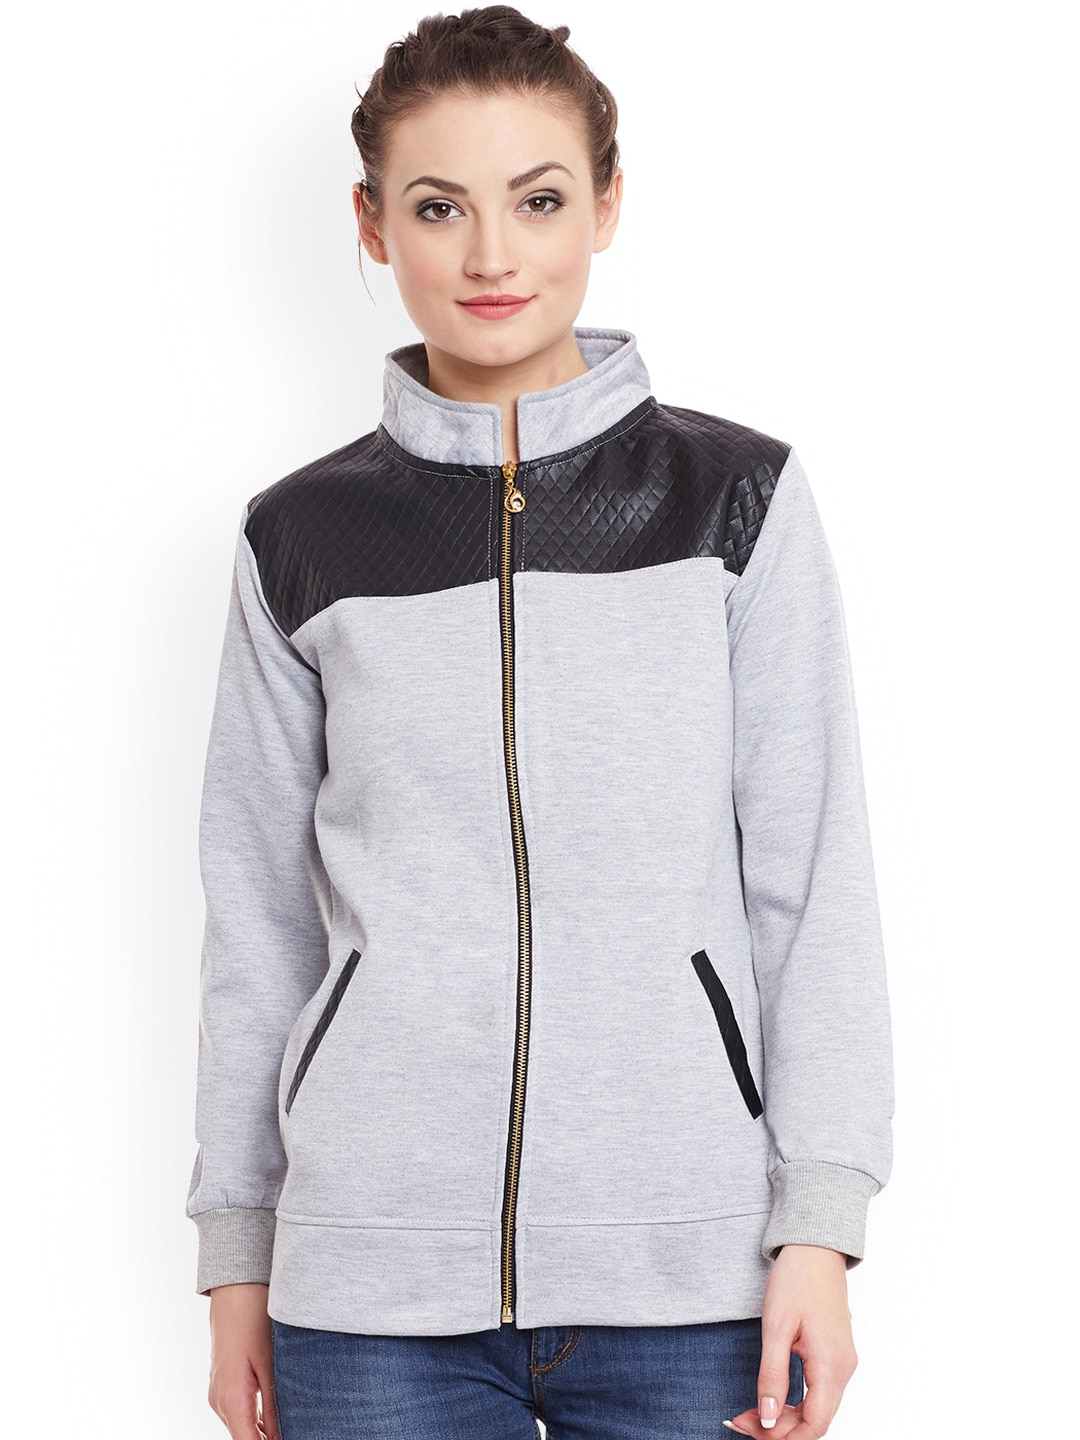 Belle Fille Women Grey Solid Jacket Price in India